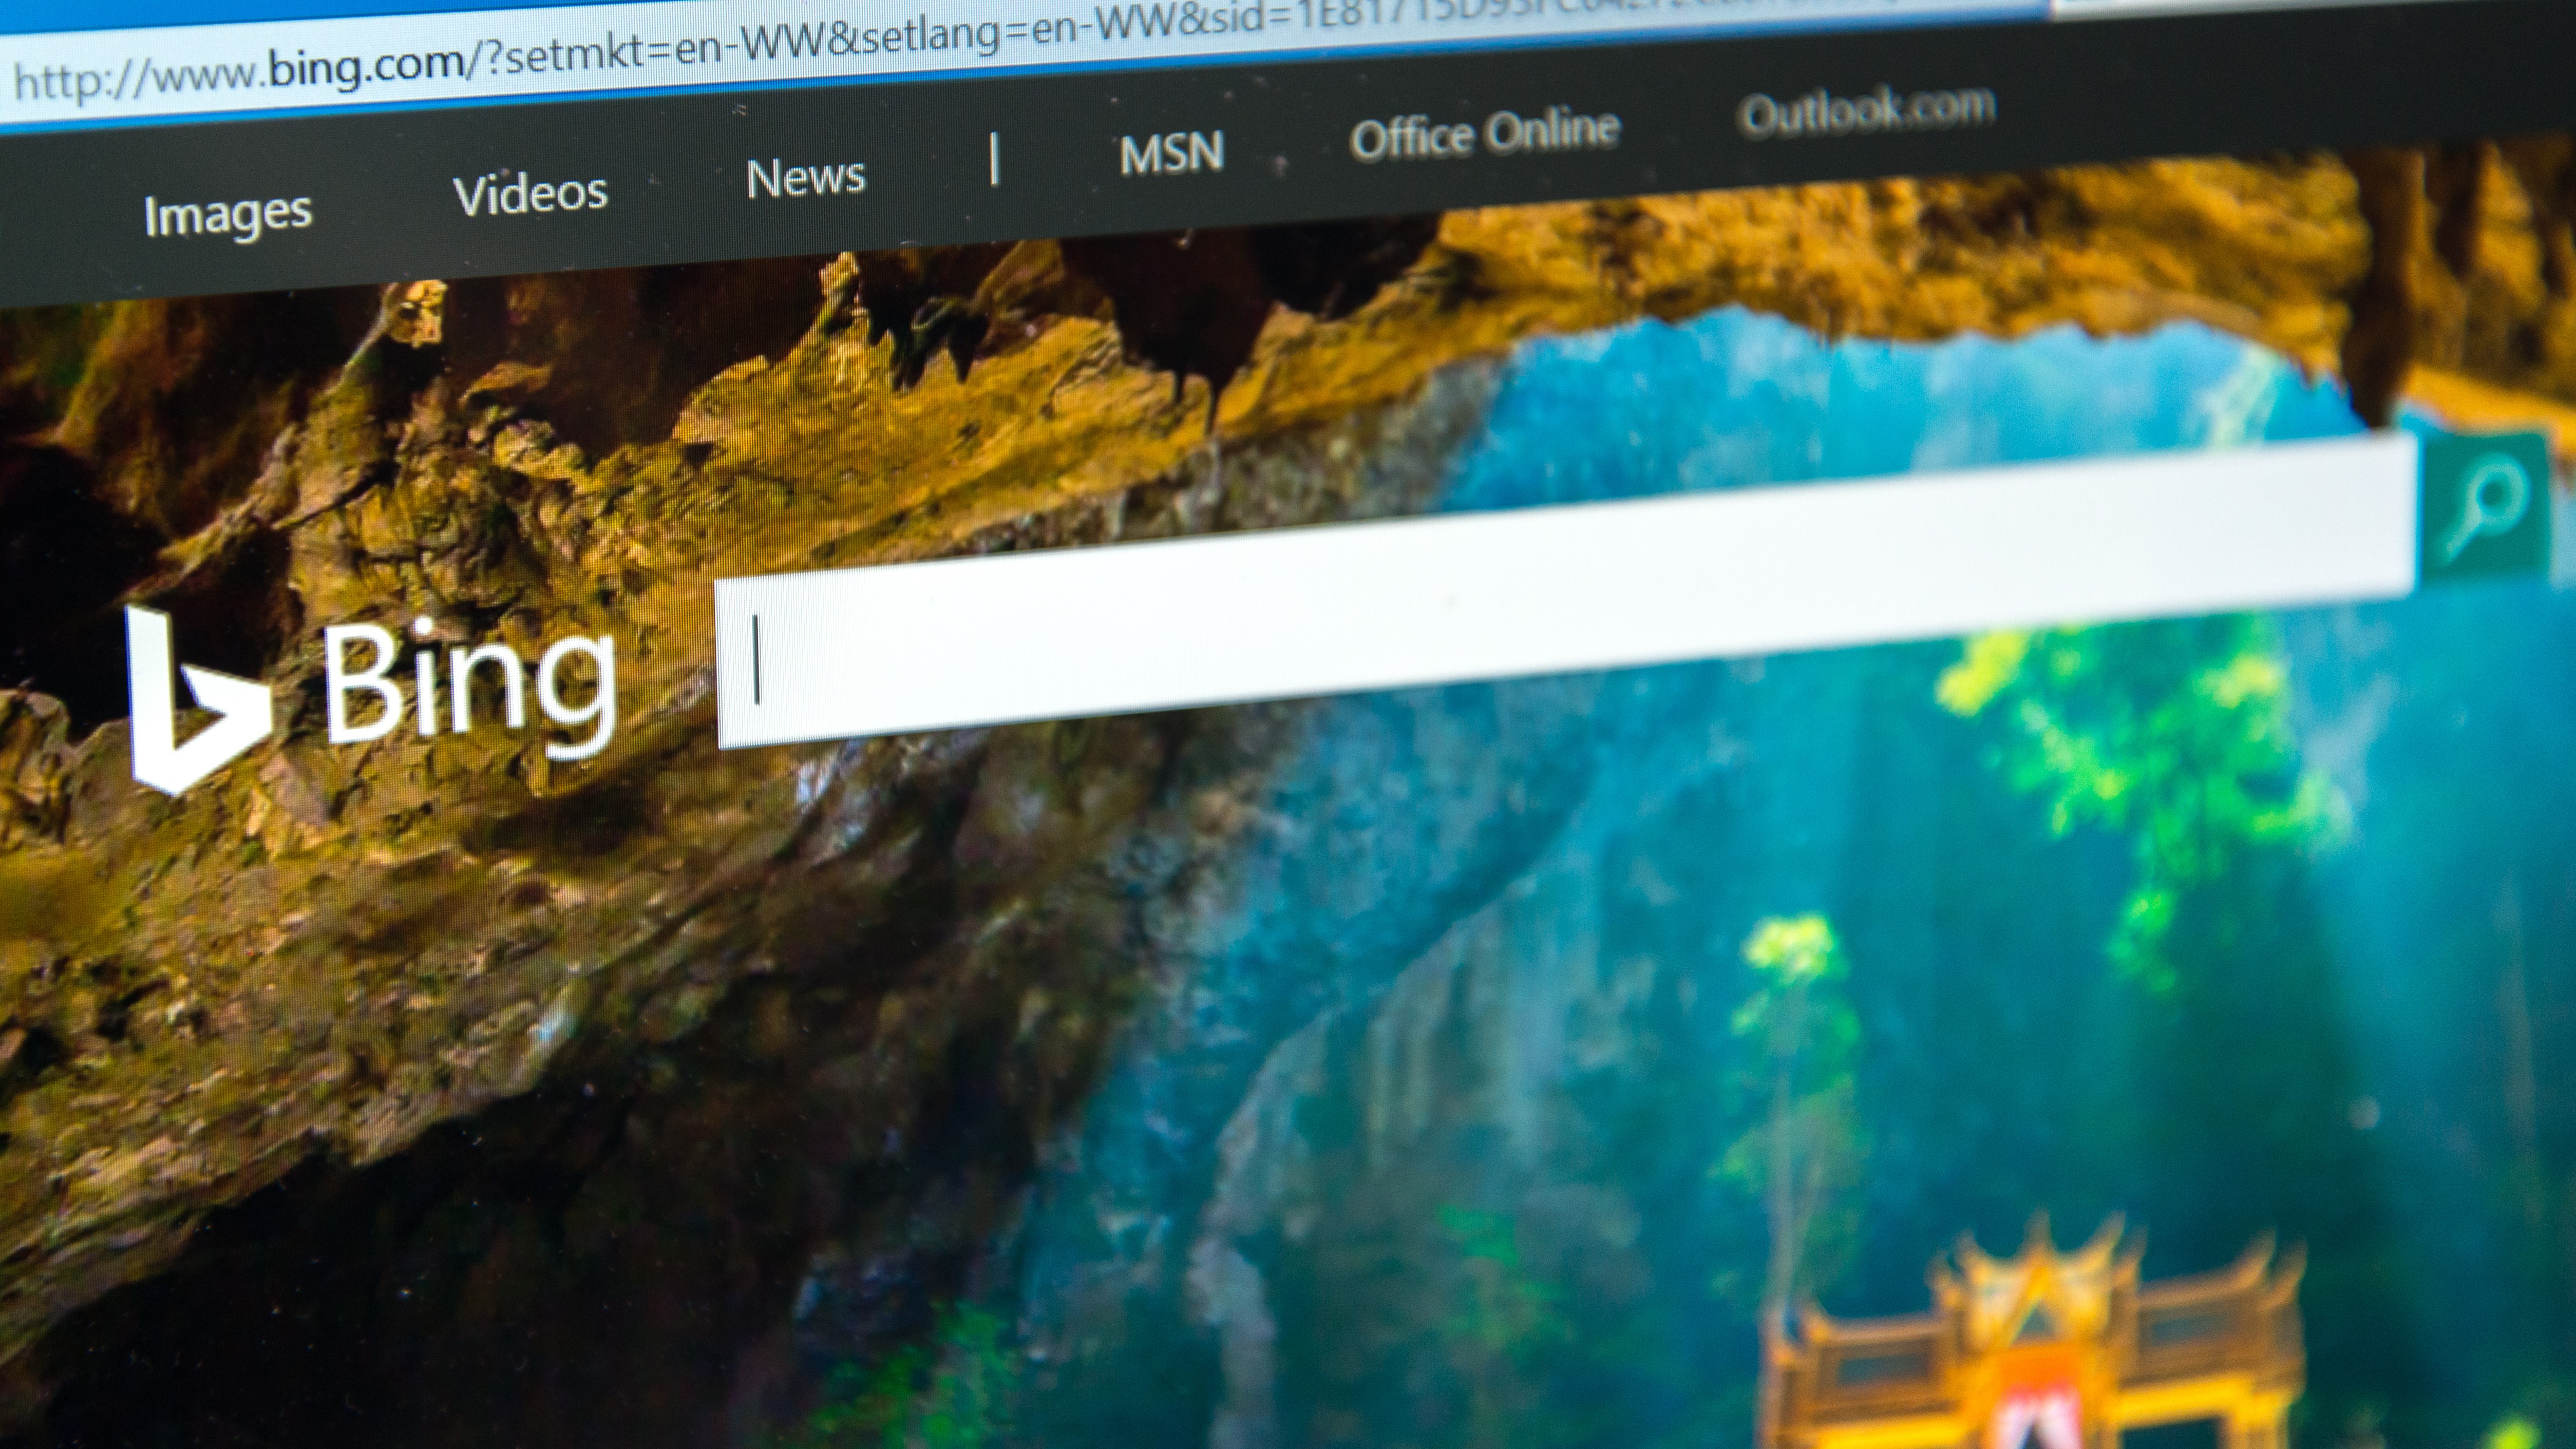 Microsoft's decides to add chat GPT to Bing search engine